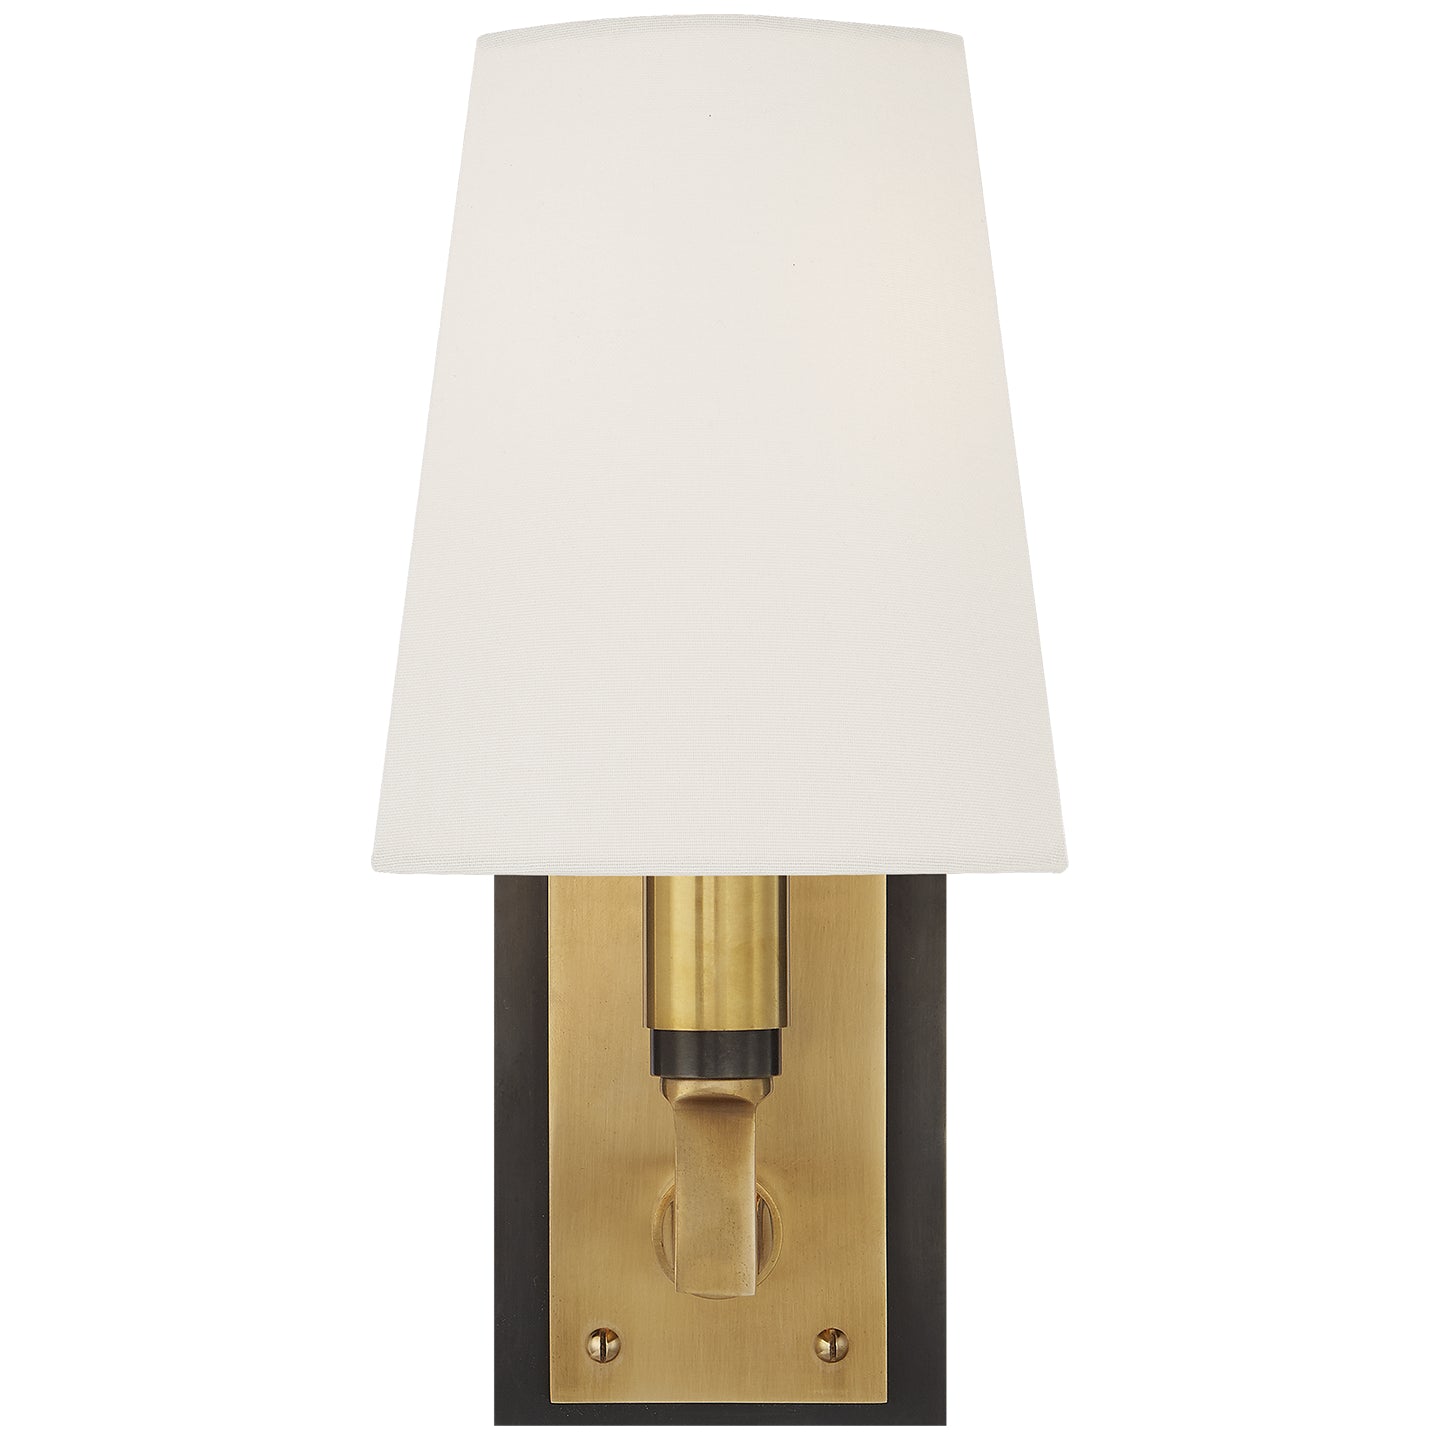 Load image into Gallery viewer, Visual Comfort Signature - TOB 2284BZ/HAB-L - One Light Wall Sconce - Watson - Bronze with Antique Brass
